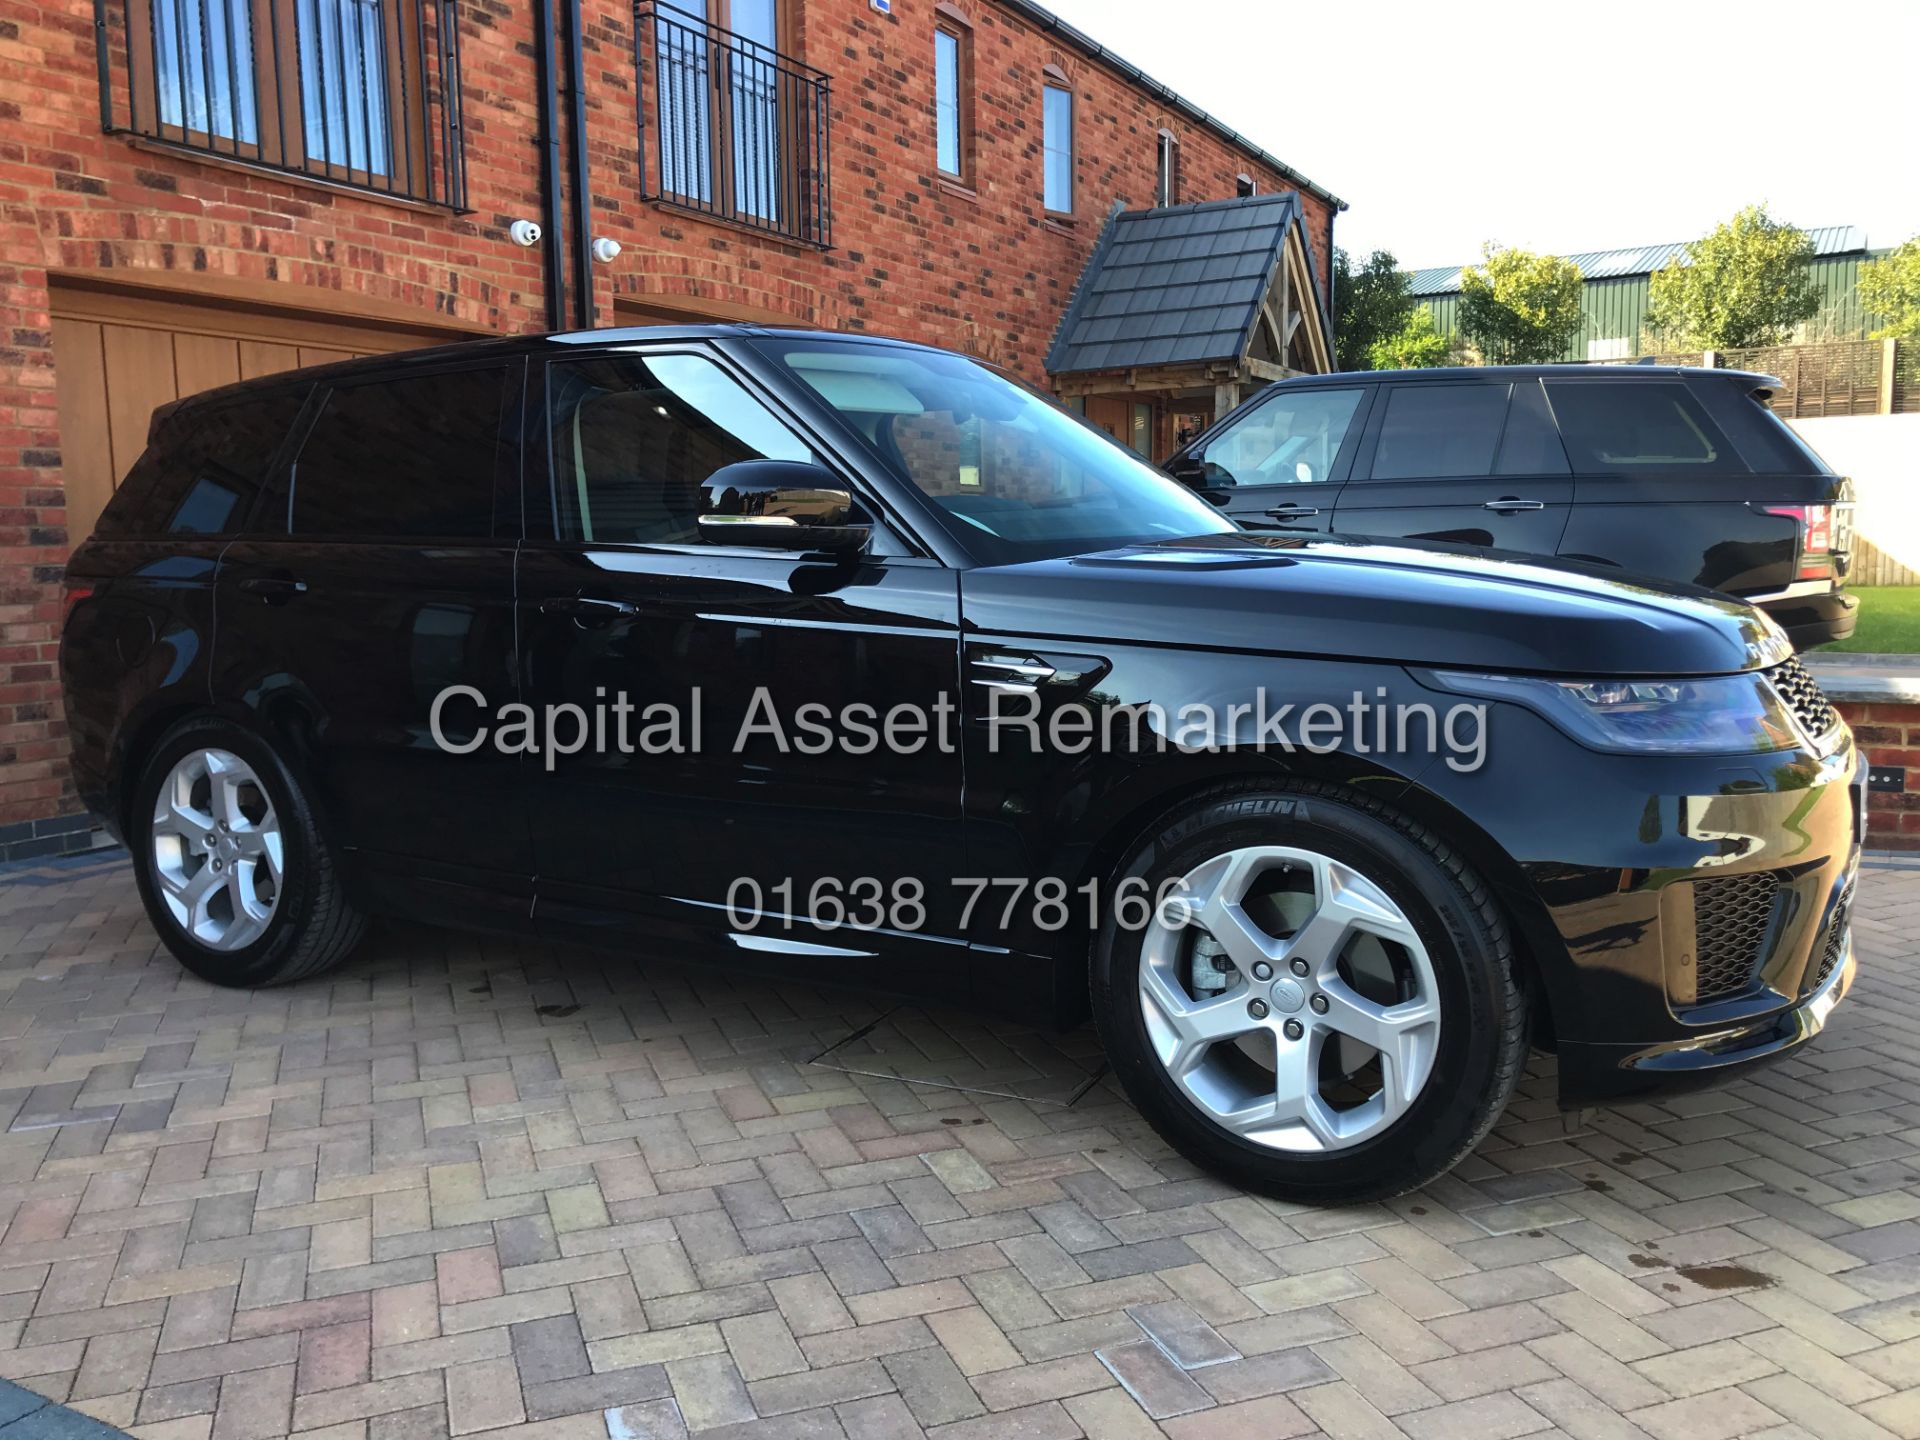 On Sale RANGE ROVER SPORT "HSE" 3.0 SDV6 AUTO (2019) FULLY LOADED - SAT NAV - PAN ROOF- FULL LEATHER - Image 2 of 35